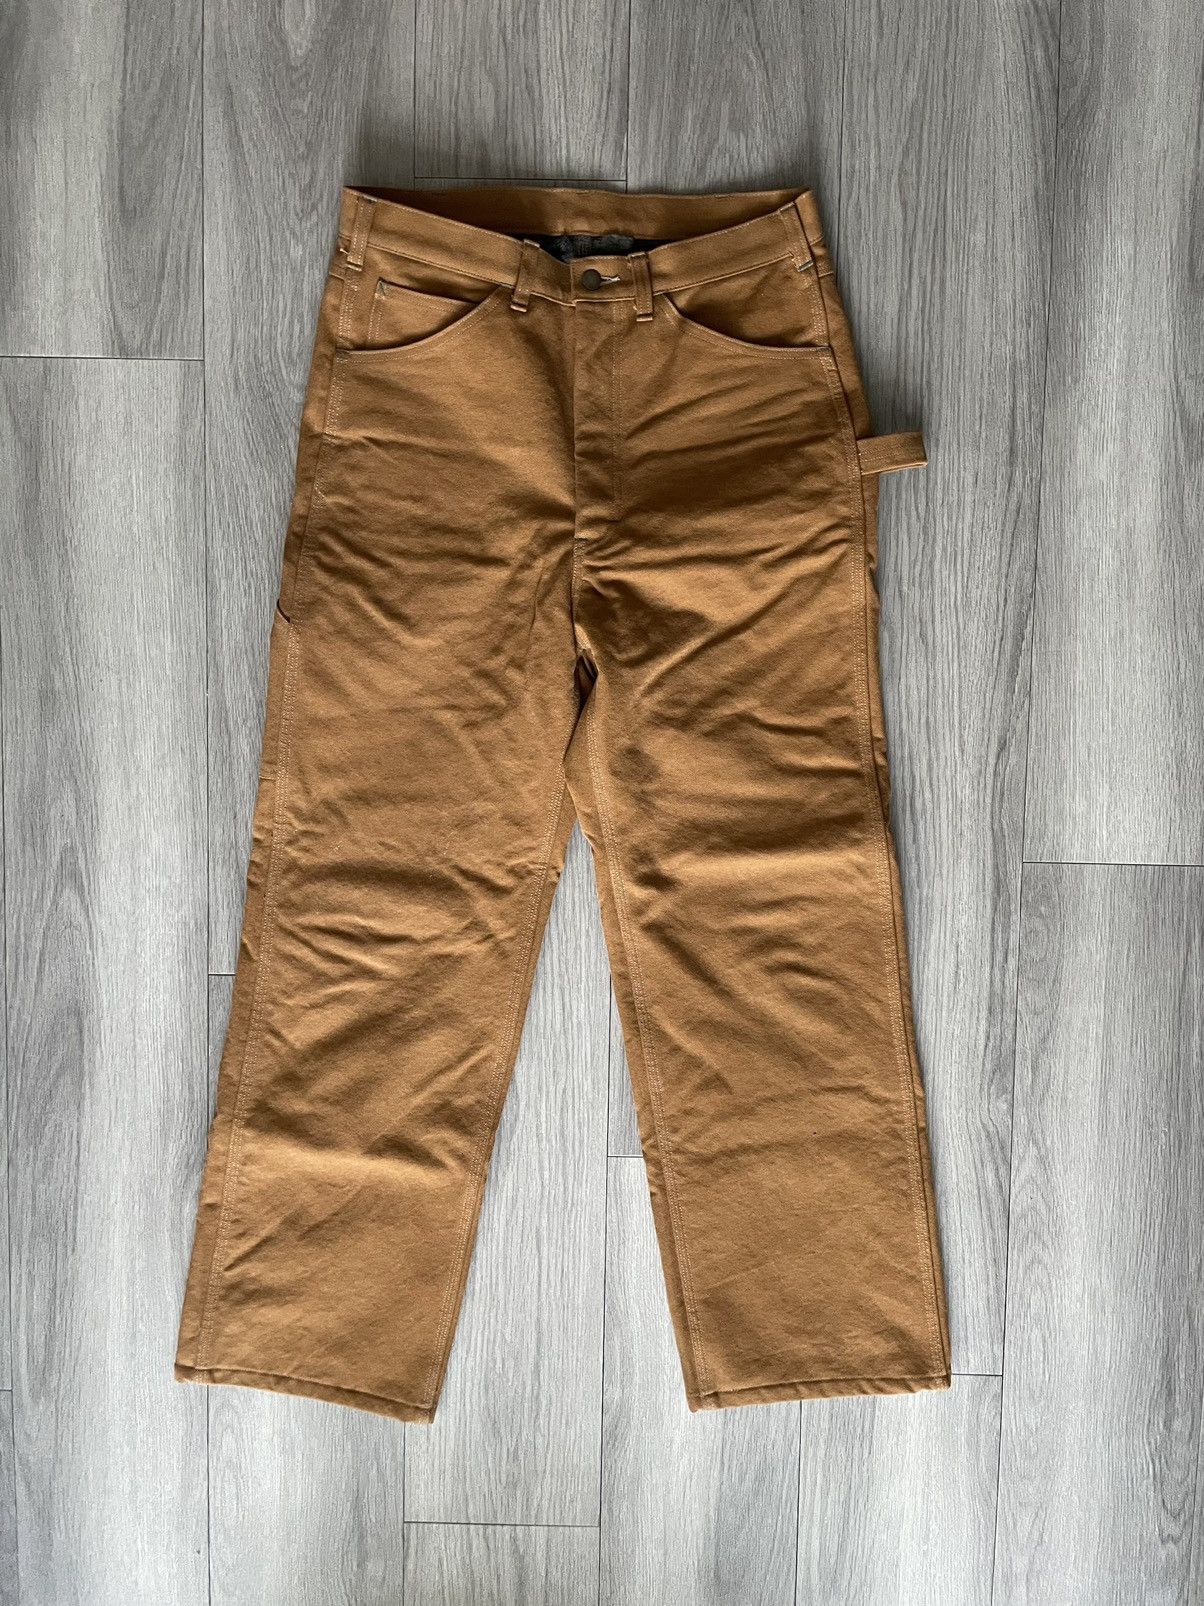 South2 West8 South2 West8 Fleece Lined Painters Pant | Grailed